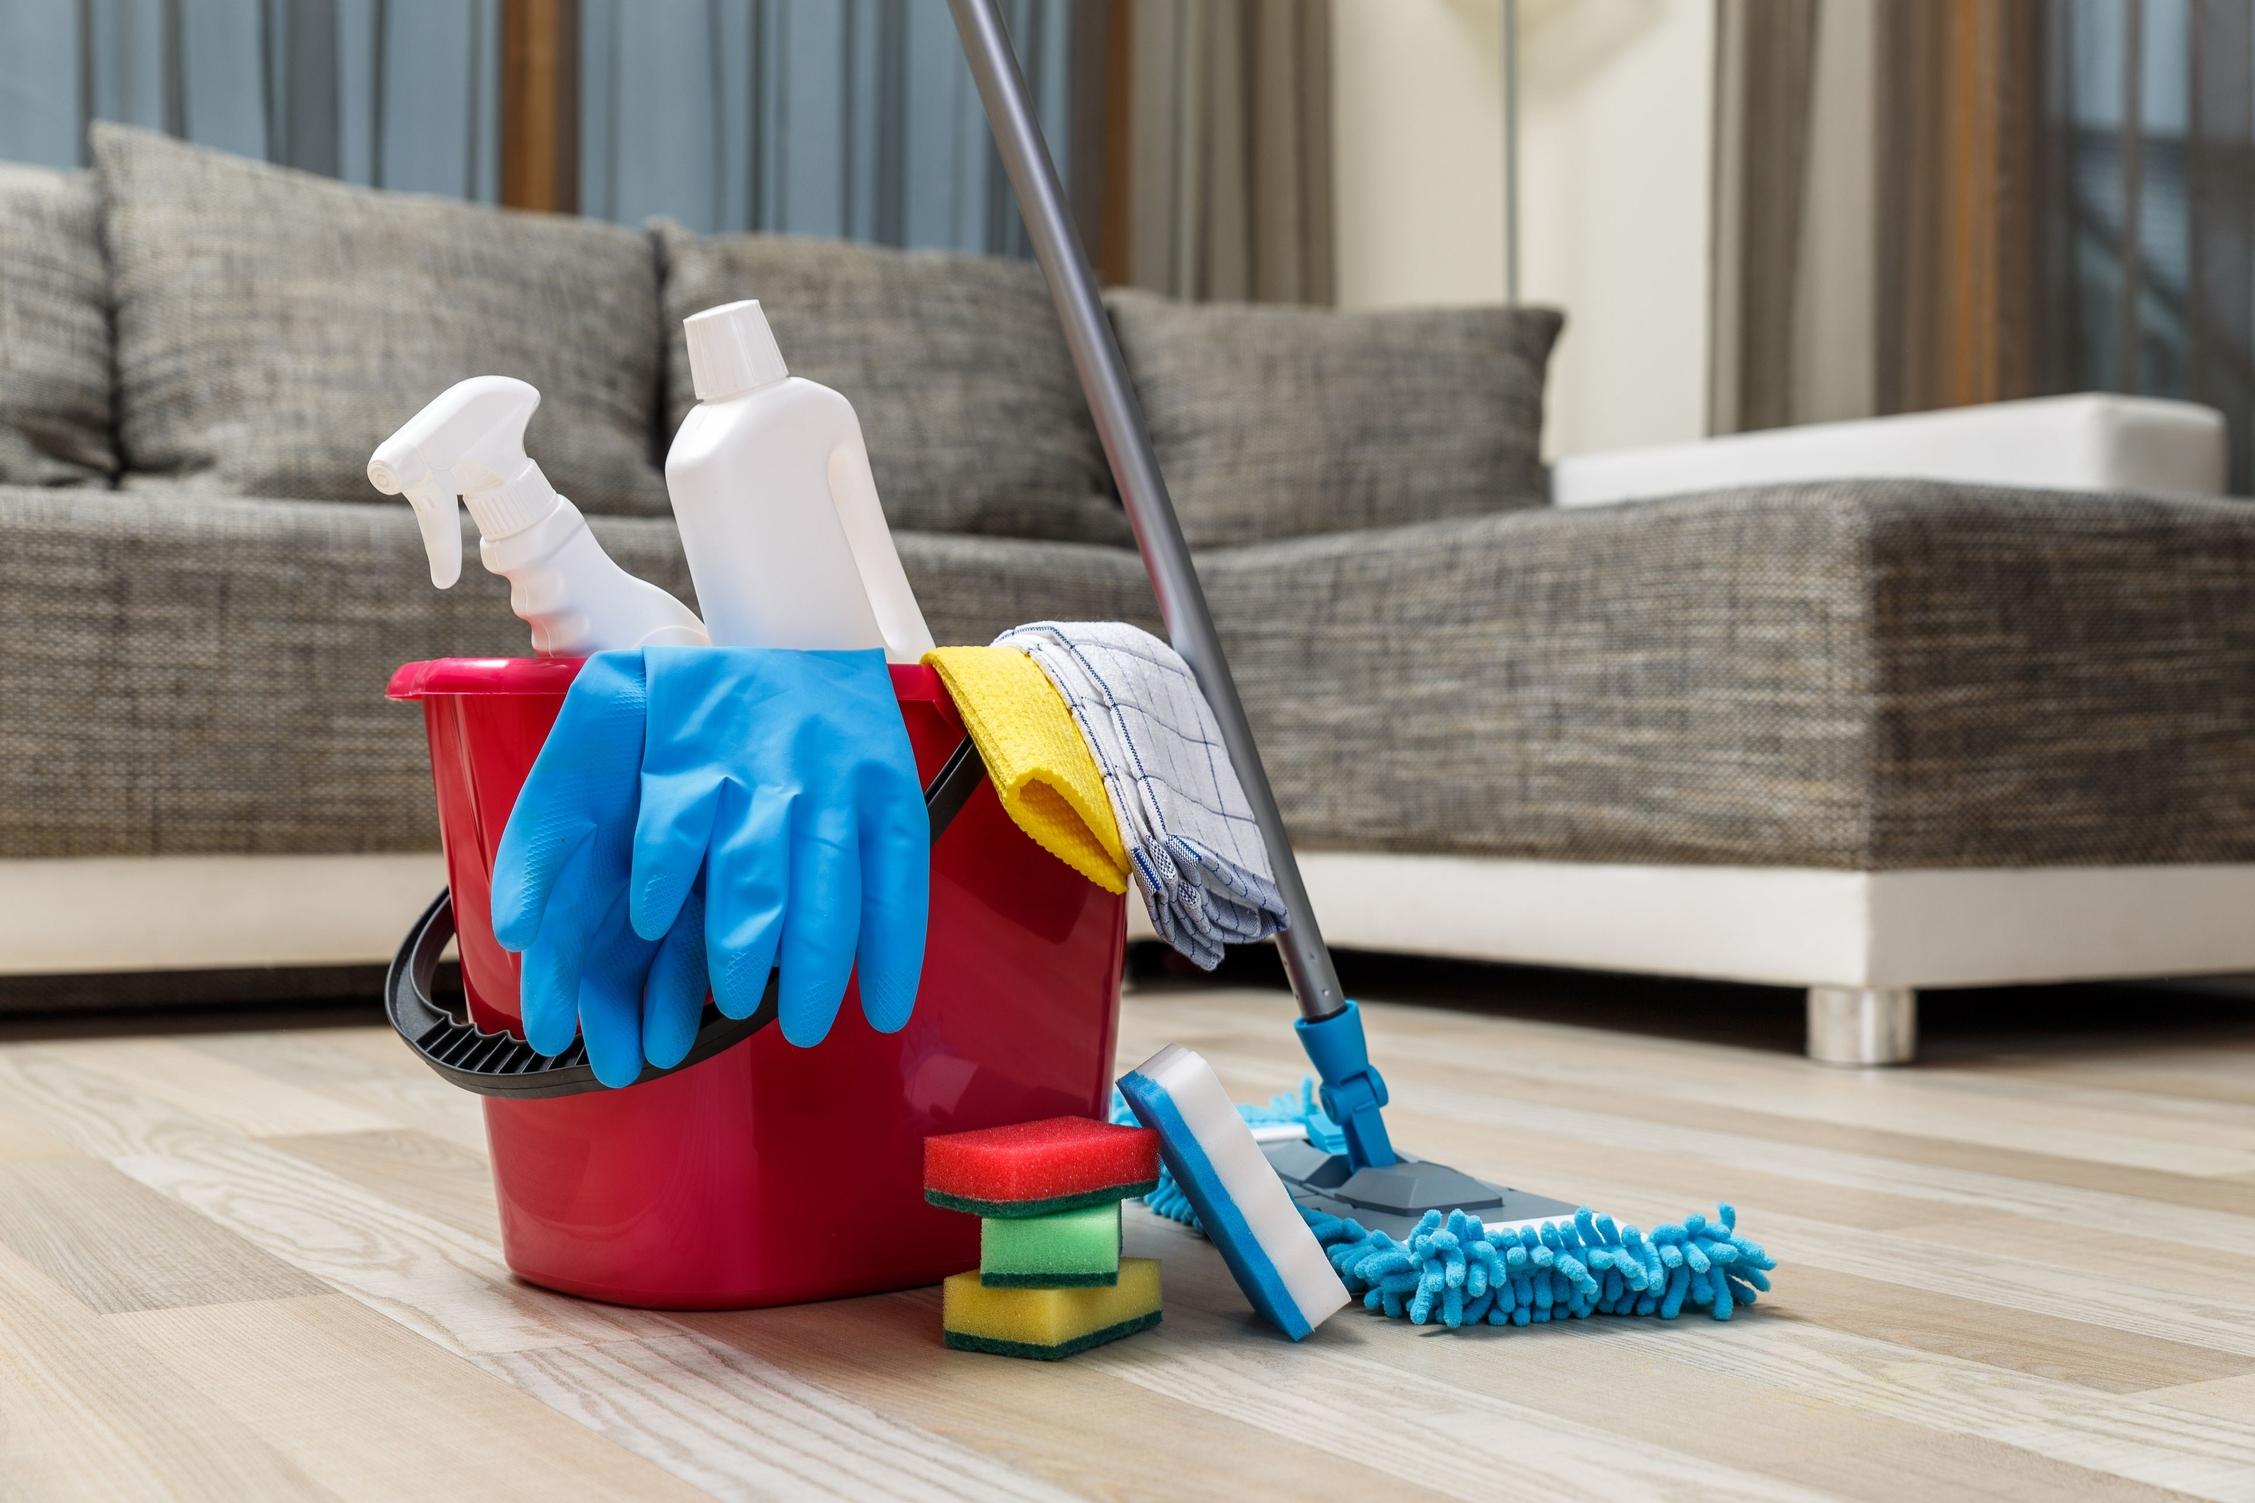 House Cleaning - Get More Done In Less Time